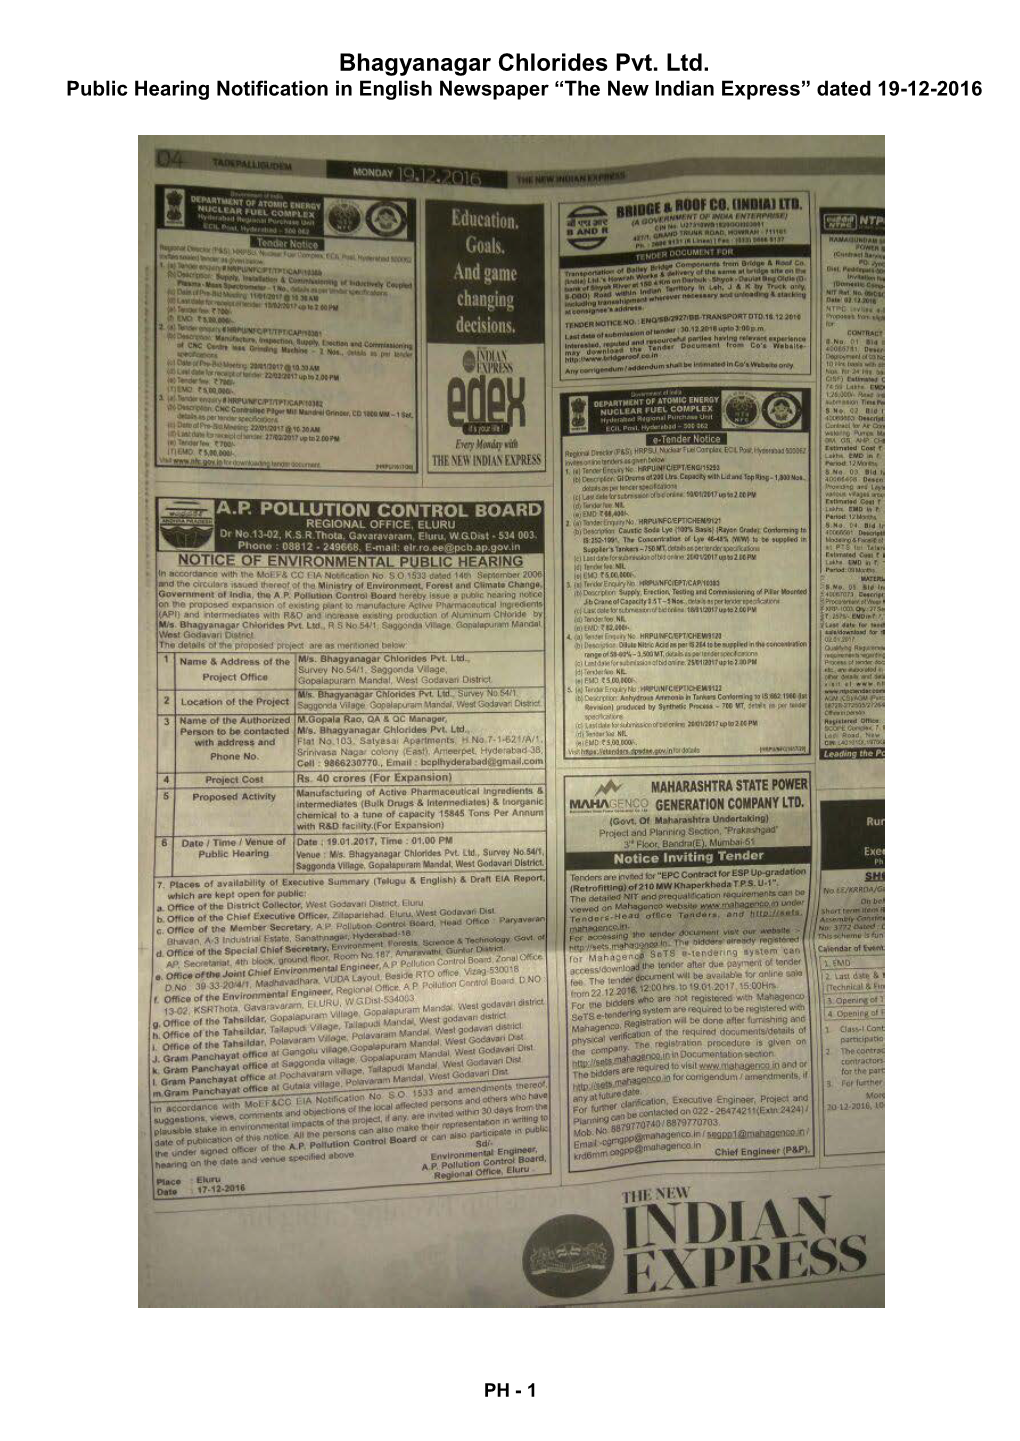 Bhagyanagar Chlorides Pvt. Ltd. Public Hearing Notification in English Newspaper “The New Indian Express” Dated 19-12-2016